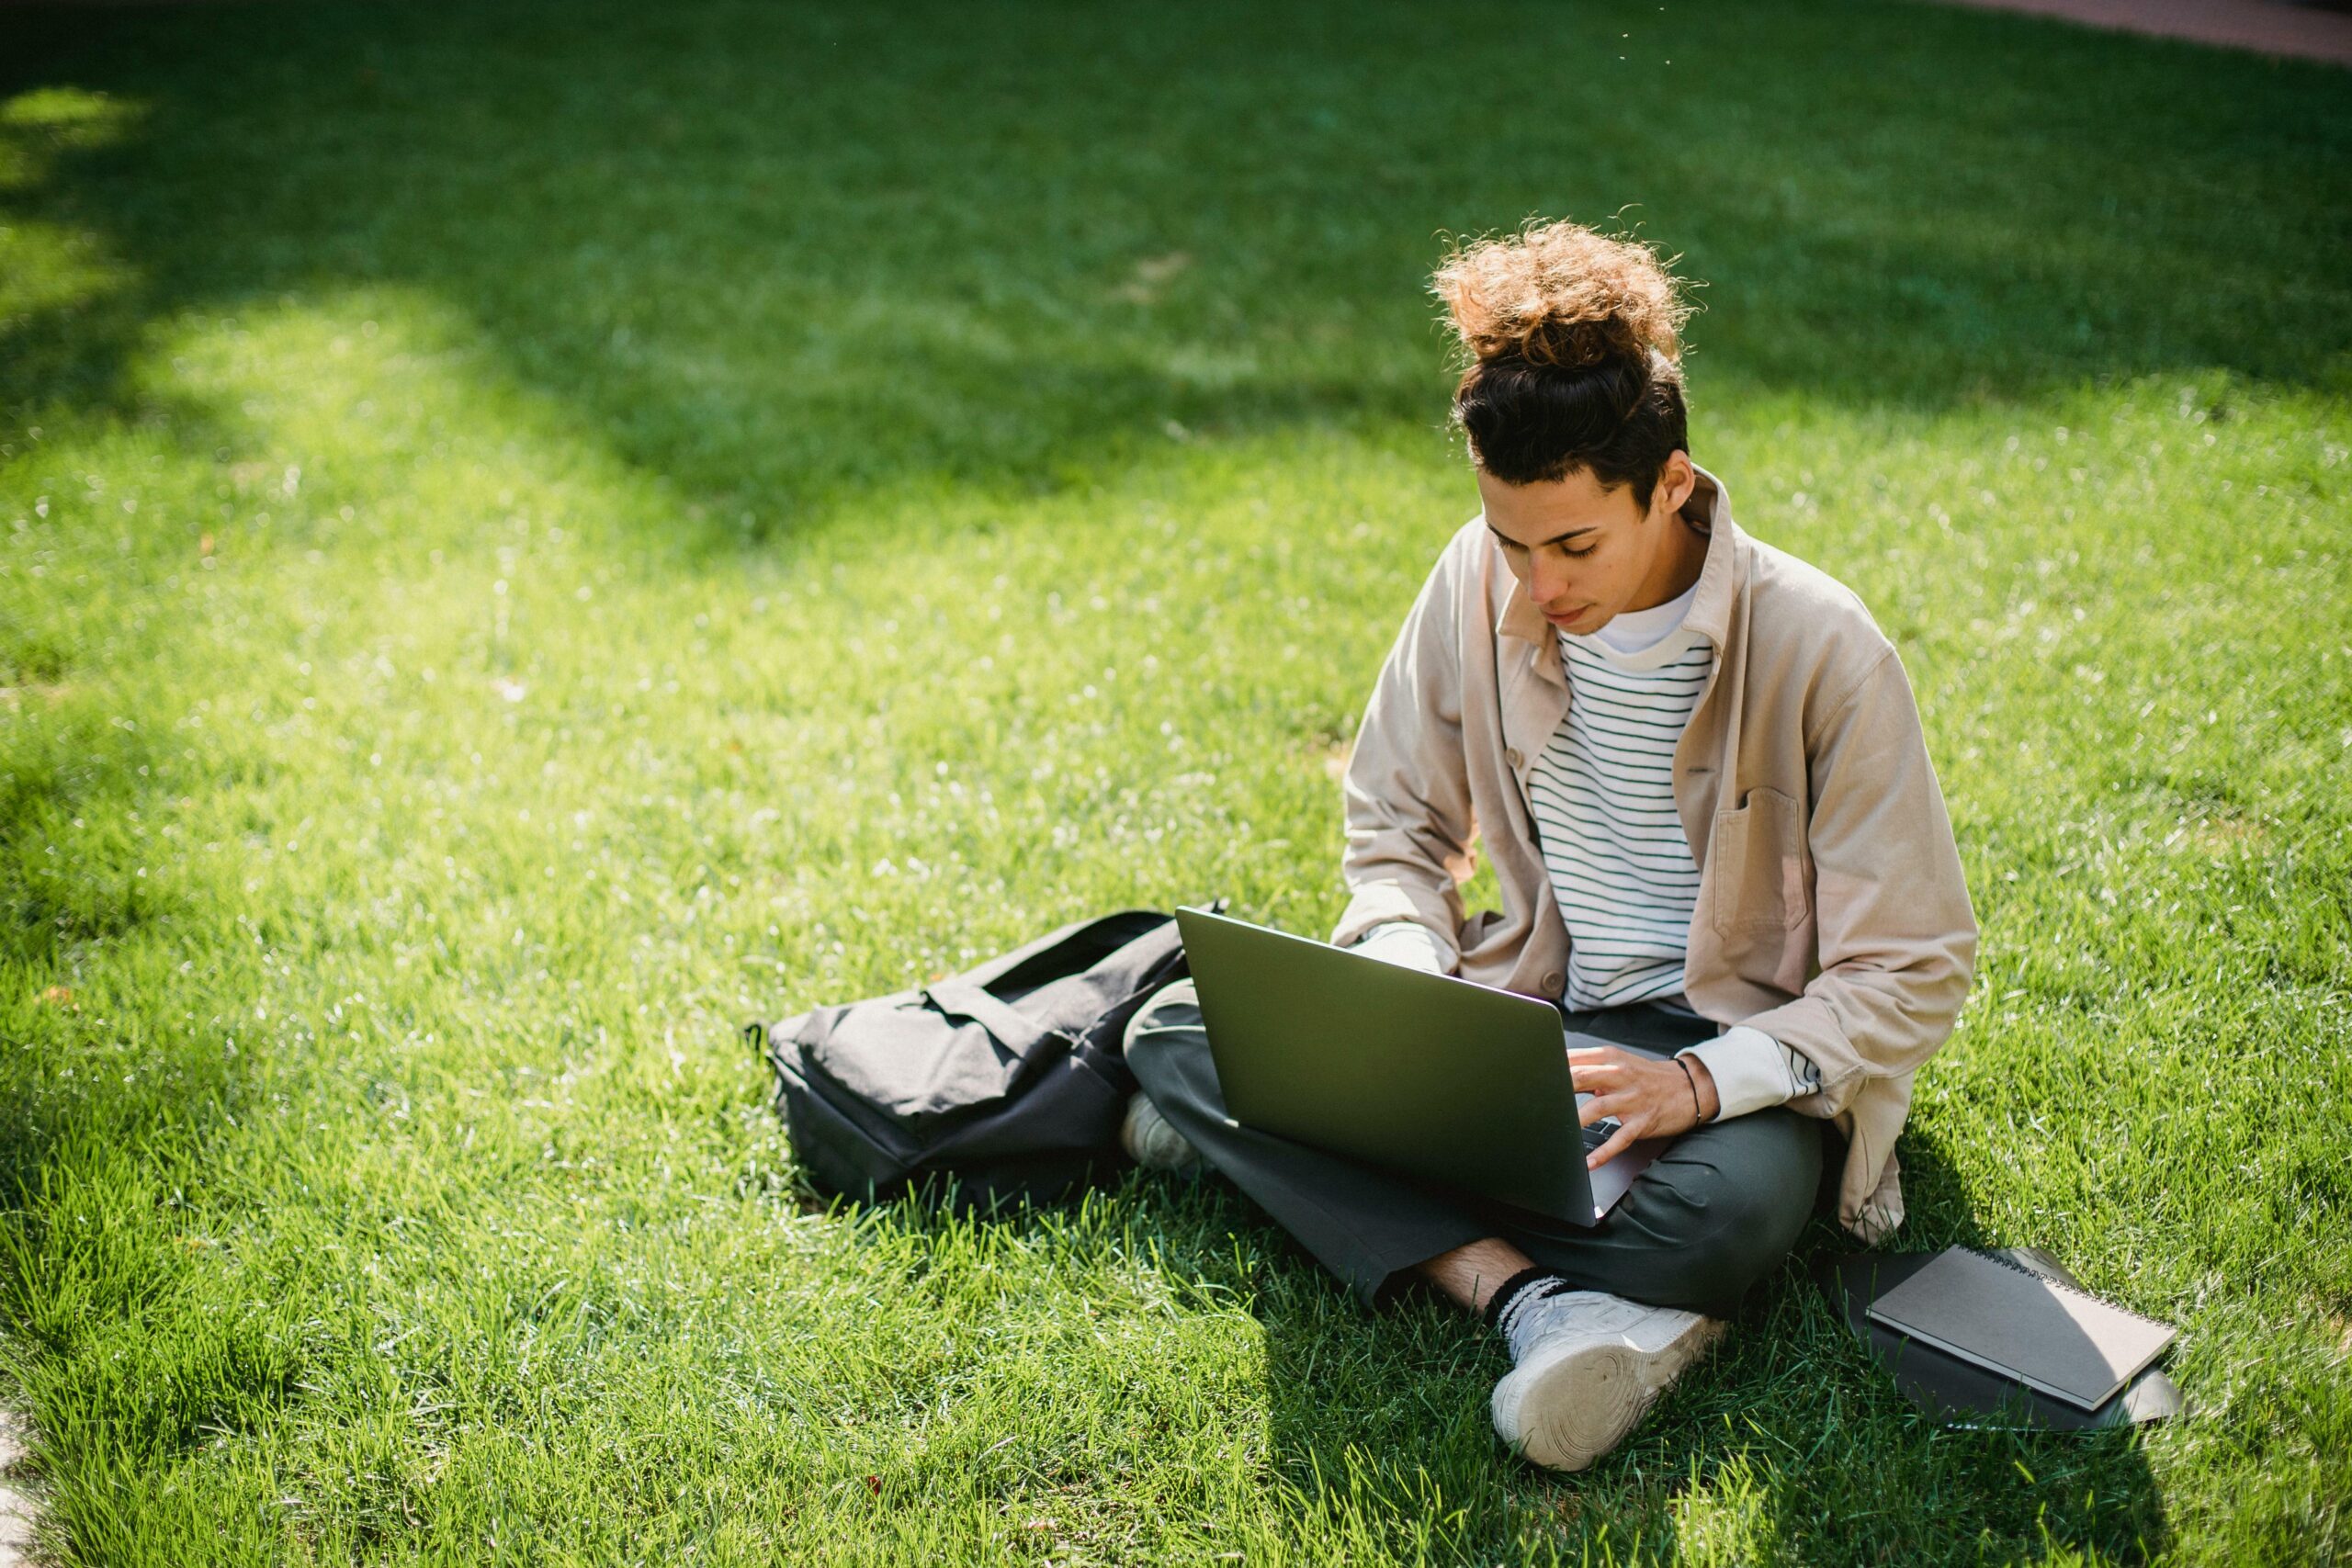 Student on lawn using laptop